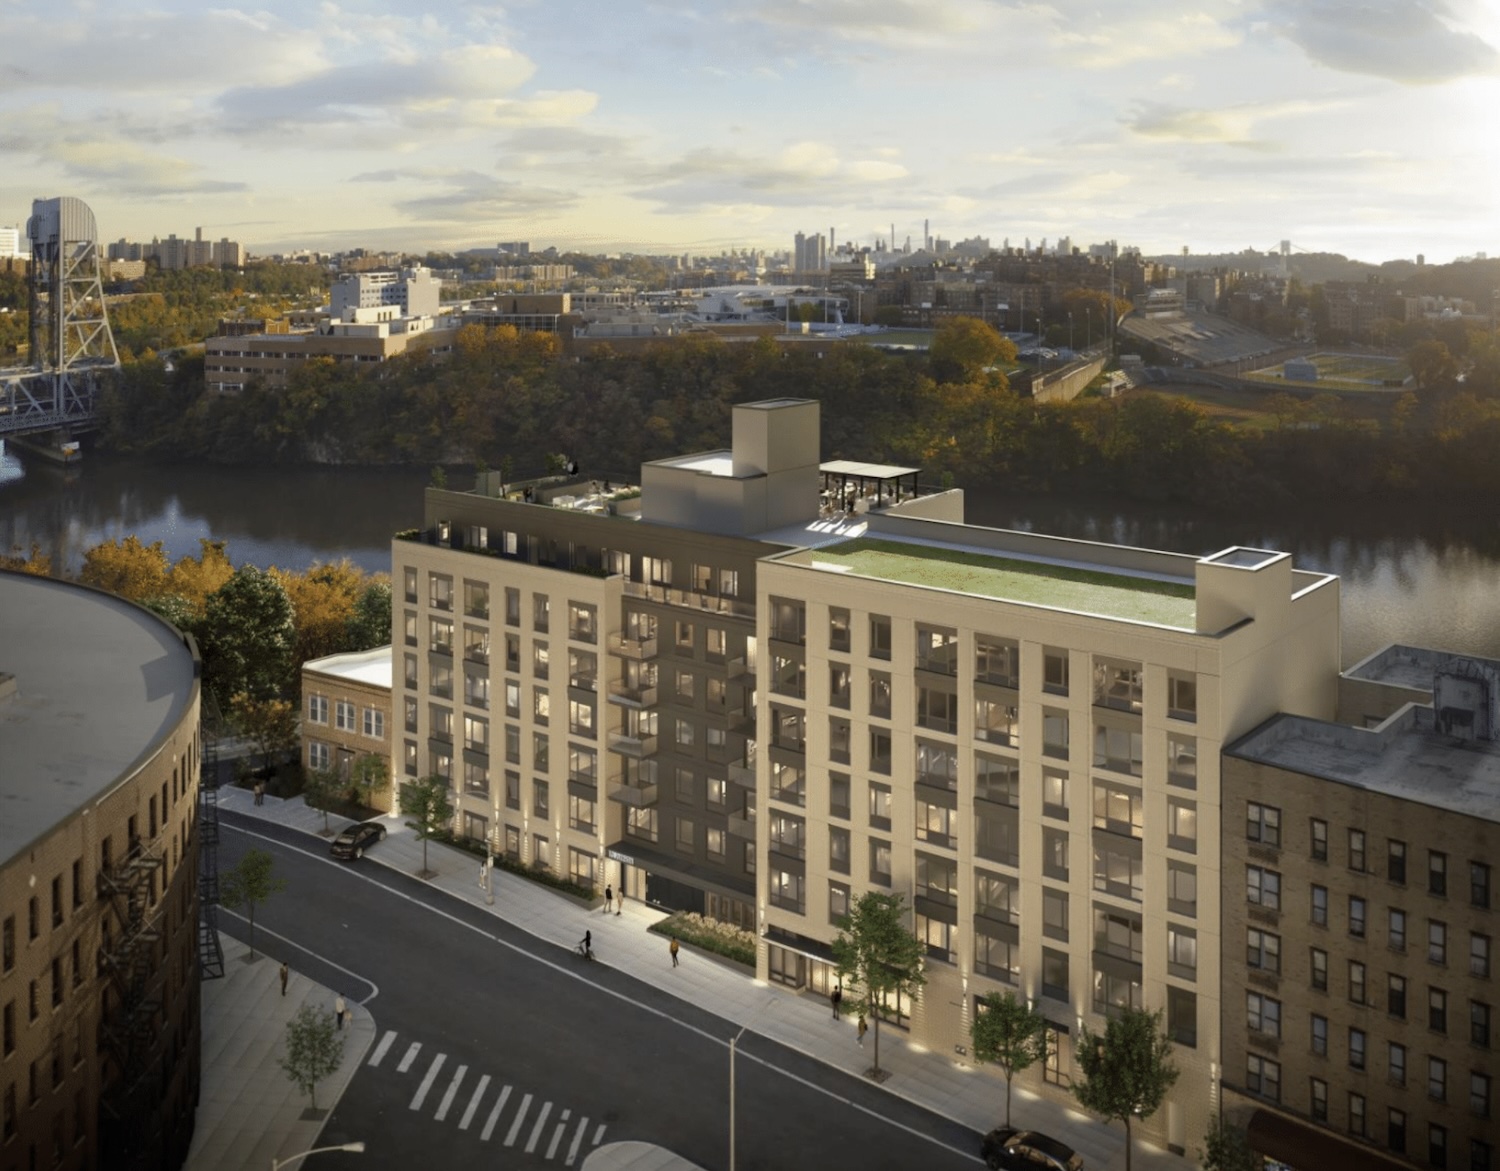 Rendering of 170 West 225th Street, courtesy of Timber Equities